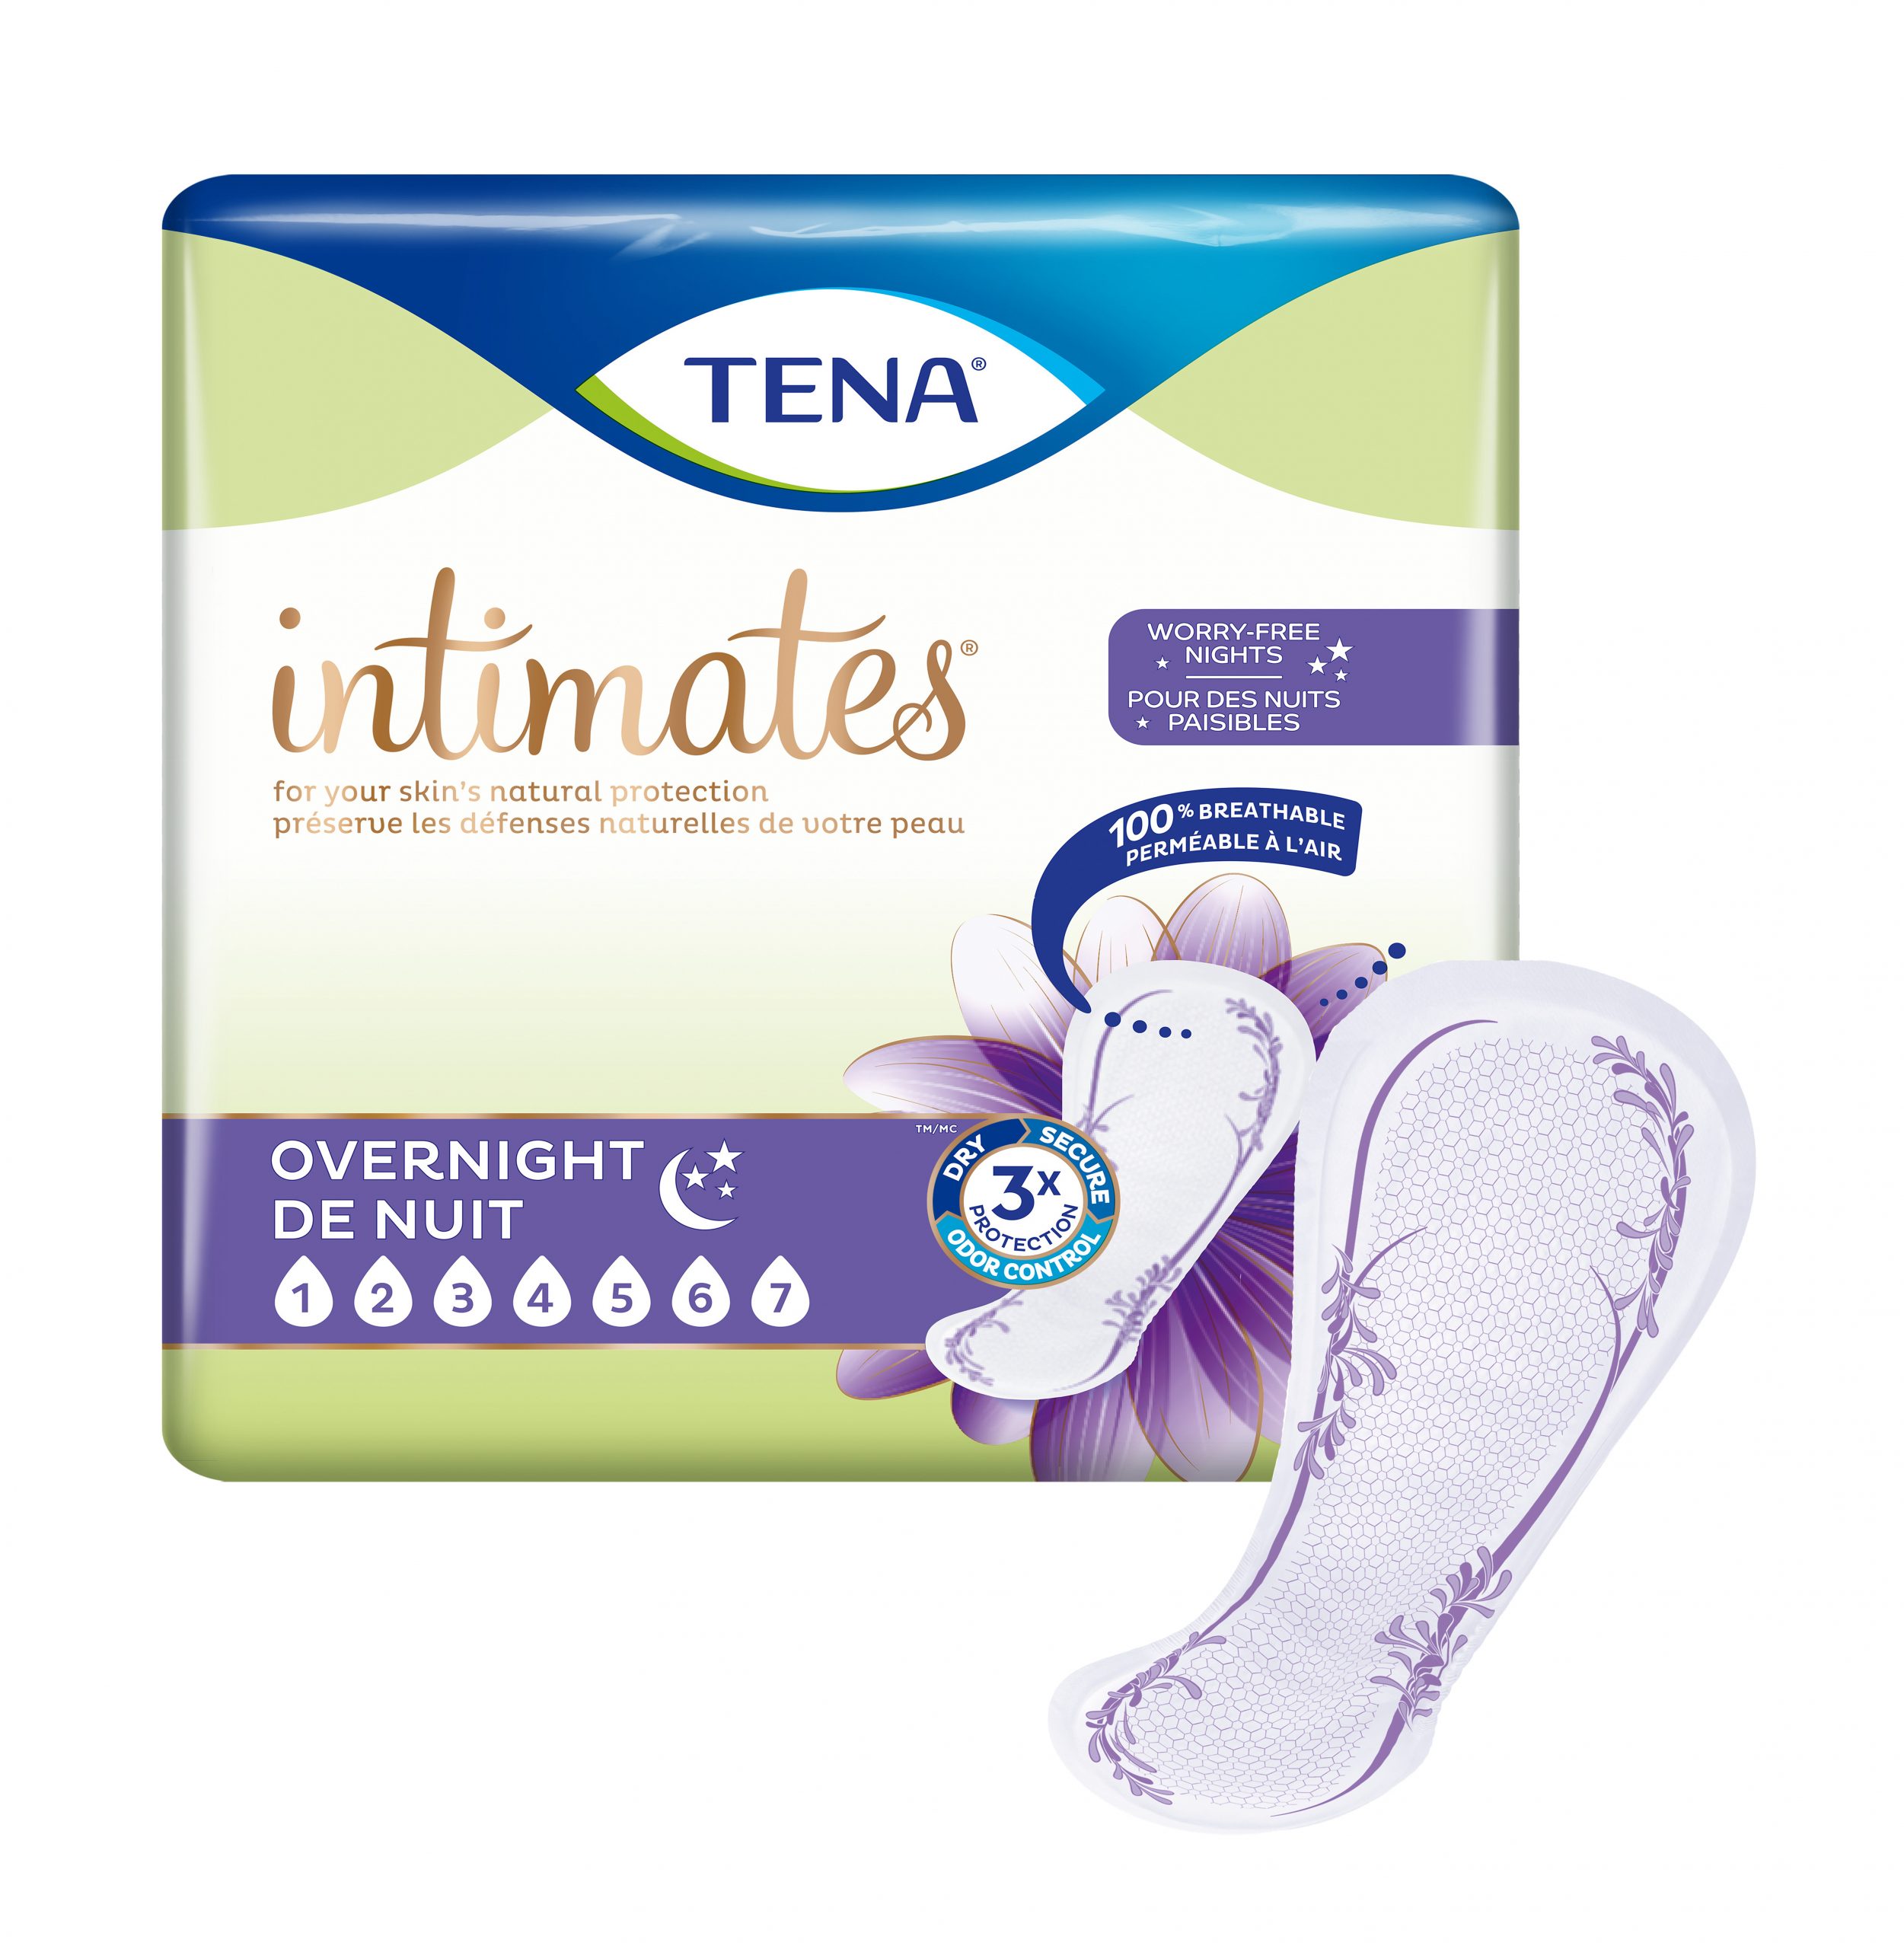 TENA Intimates Overnight Incontinence Pads, Maximum Absorbency, 54282, Case of 84